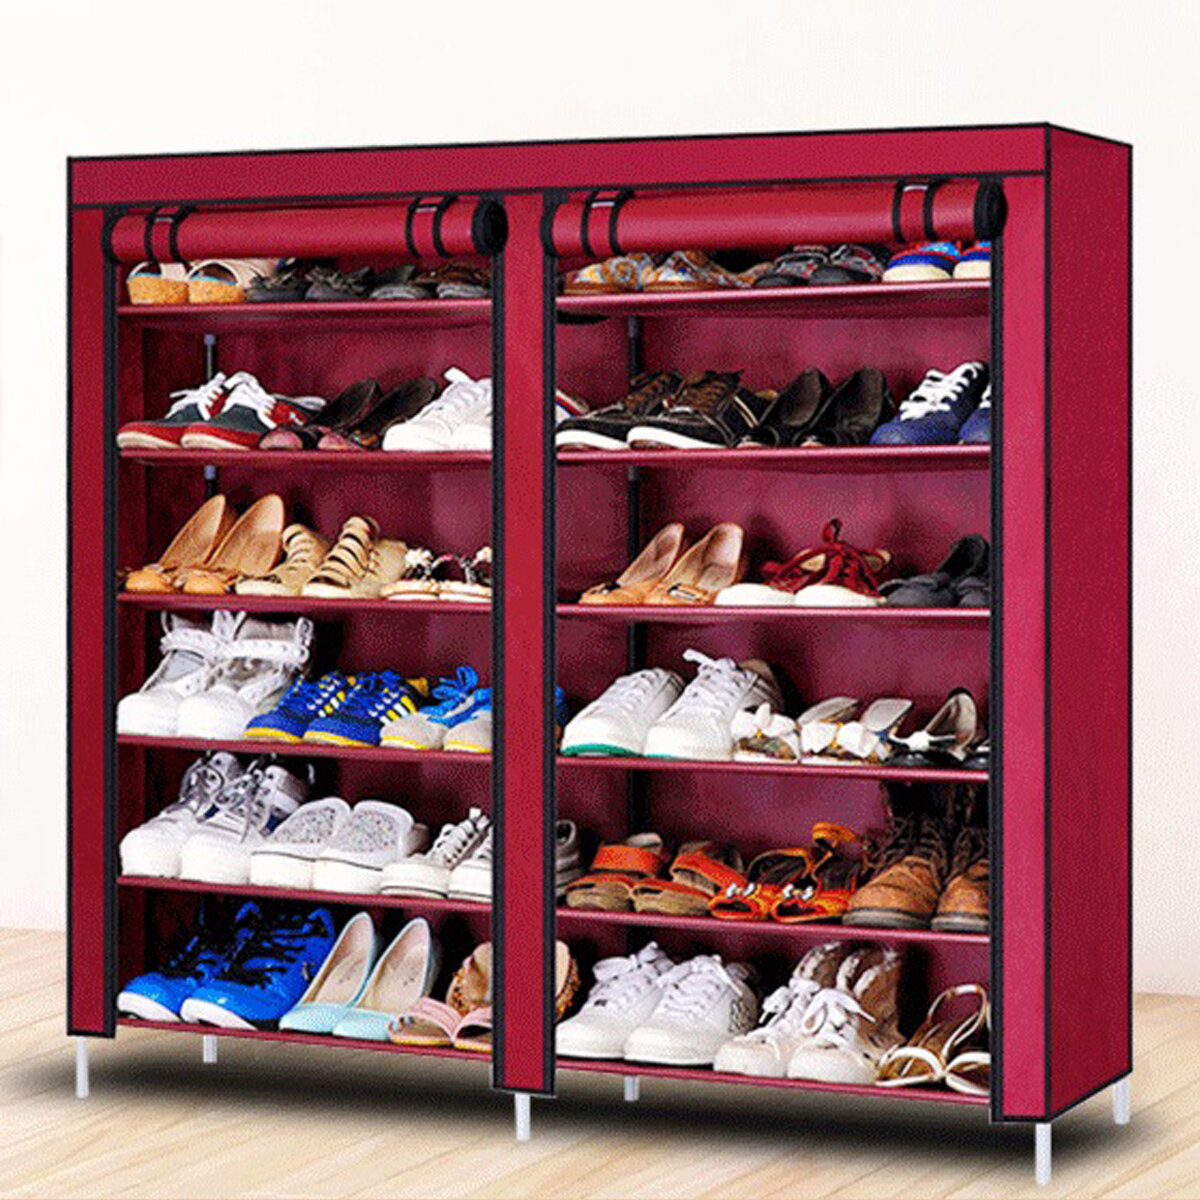 BaiYeXuan XG-12 Non-woven Cabinet Double-row Dustproof Suitable for Living Room and Bedrooom